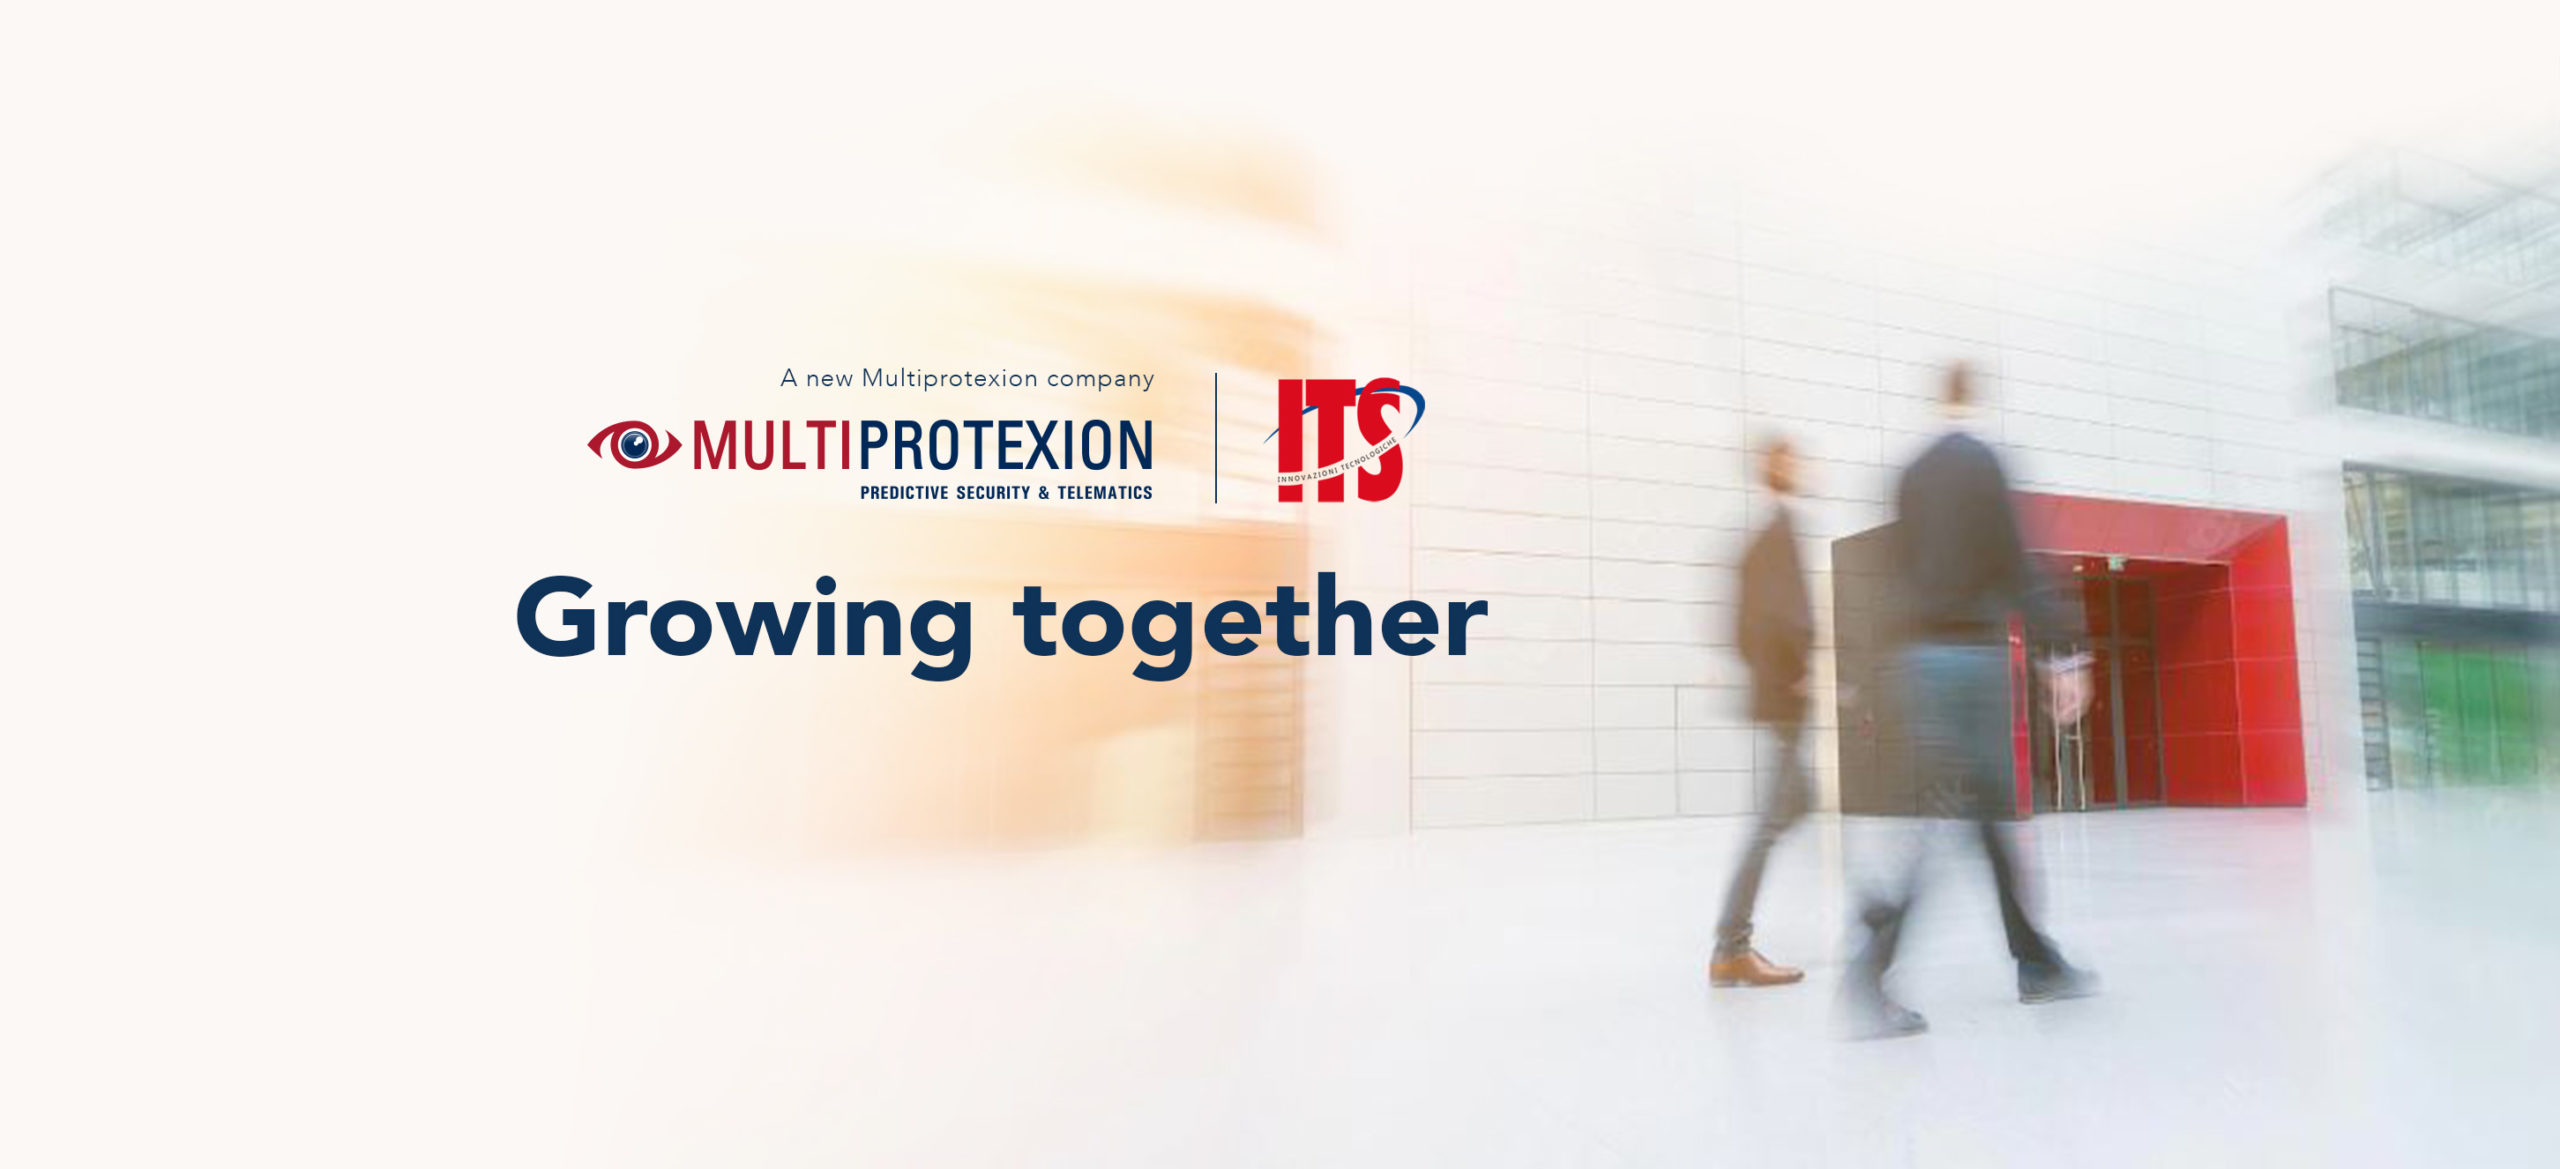 MULTIPROTEXION COMPLETES THE ACQUISITION OF ITS SICUREZZA